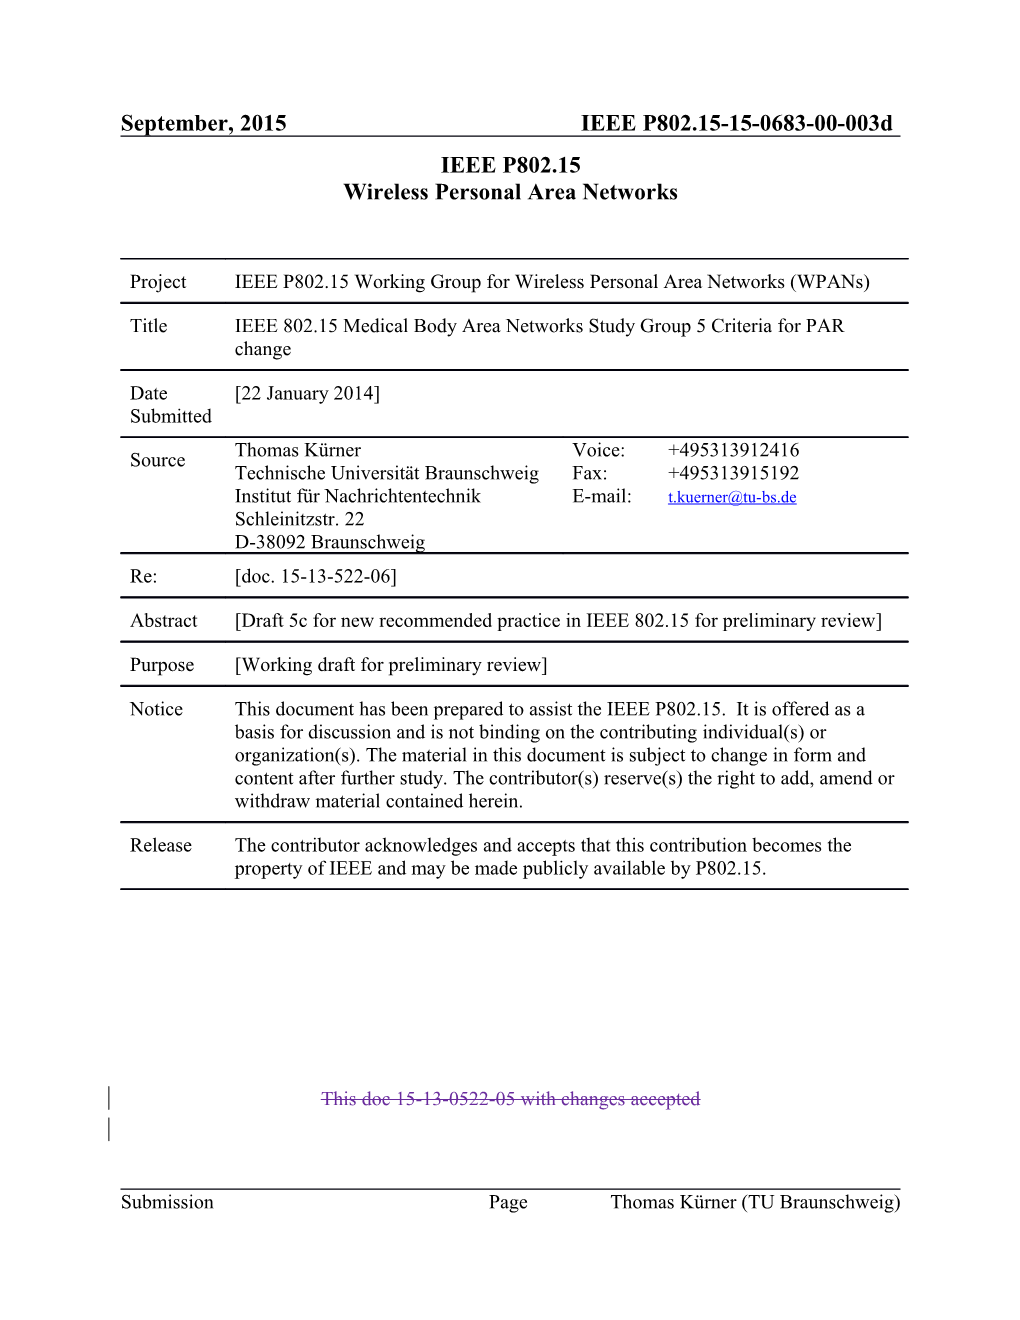 IEEE 802.15 Medical Body Area Networks Study Group 5 Criteria